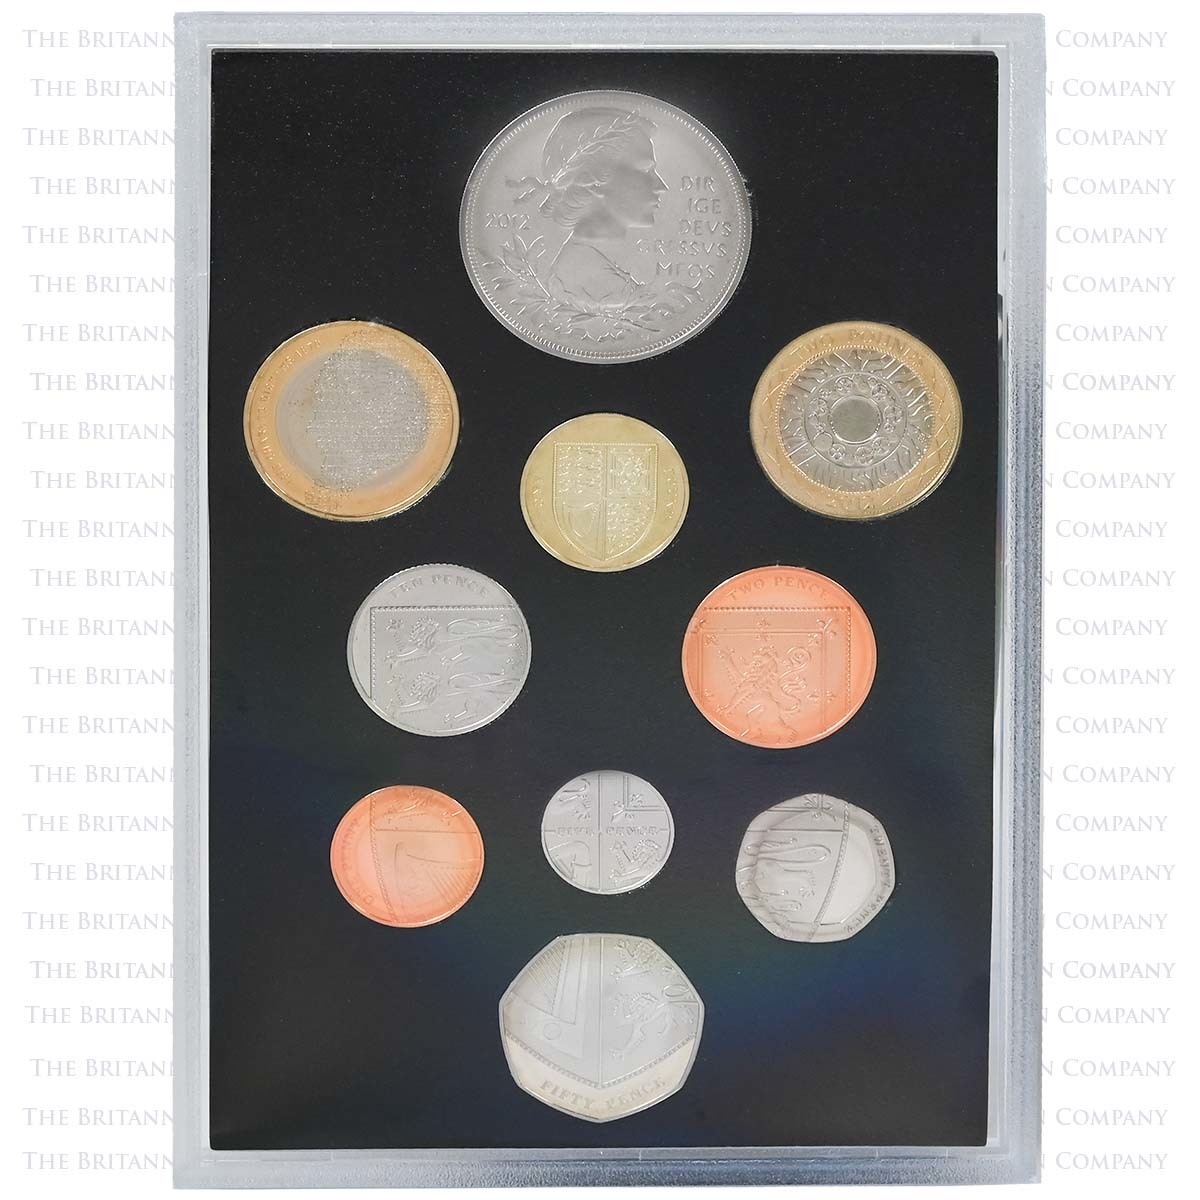 2012-proof-coin-set-002-m